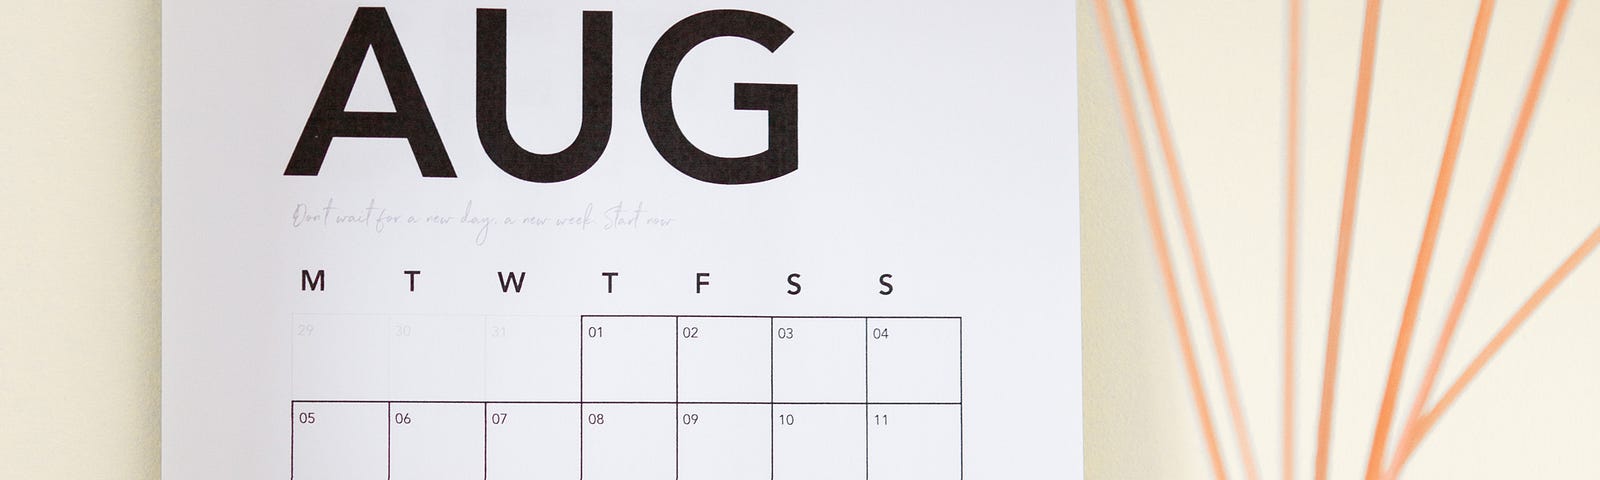 Blank calendar titled August with decorative element in front.